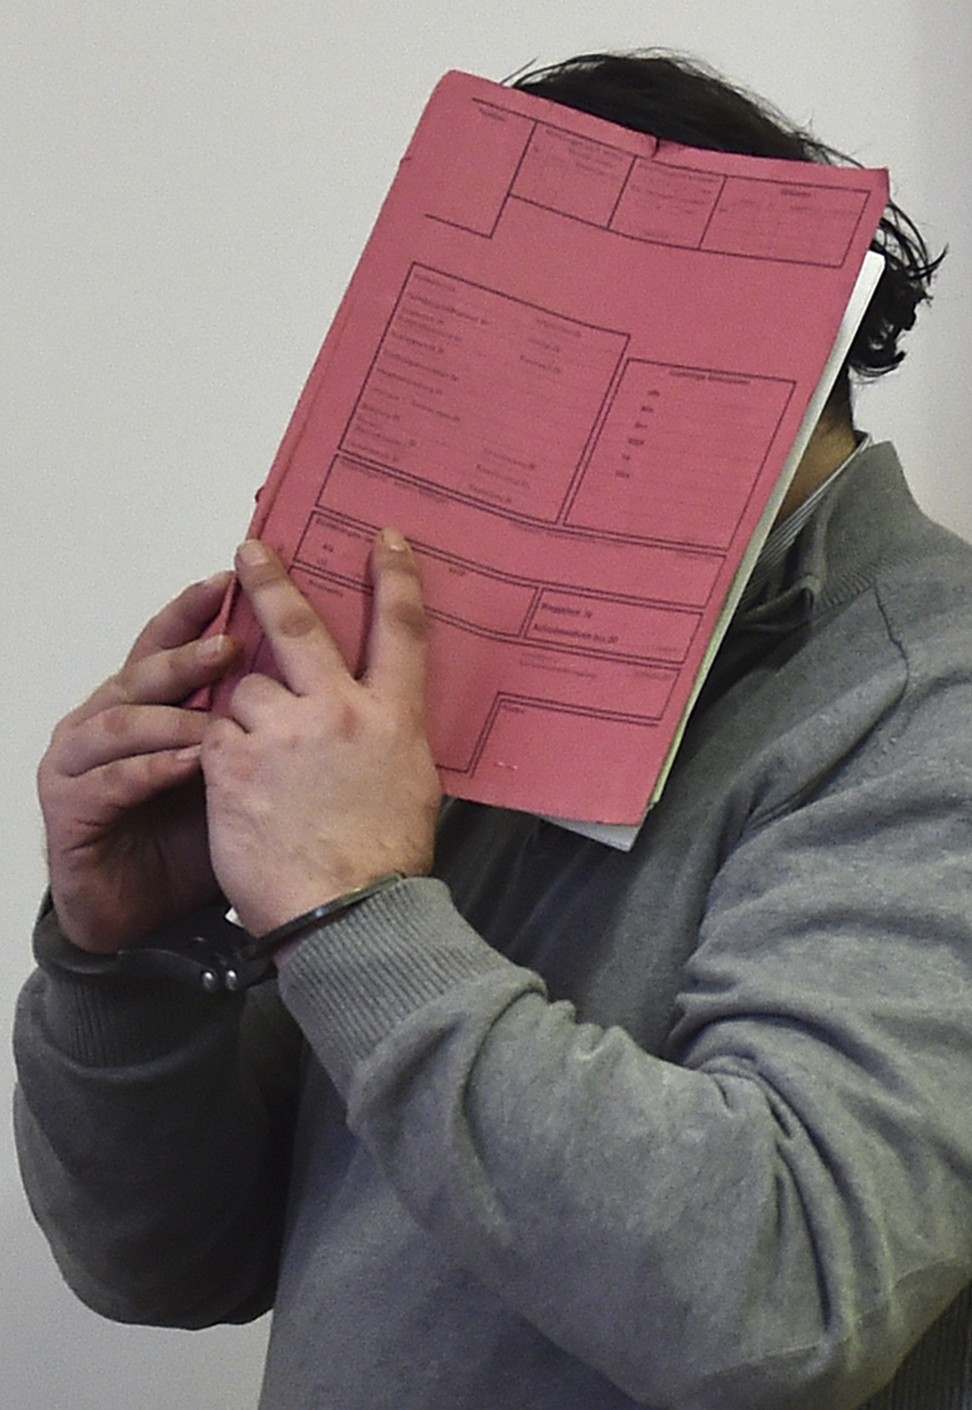 In this February 26, 2015 file photo, former nurse Niels Hoegel covers his face with a file at the district court in Oldenburg, Germany. Prosecutors in Oldenburg said on January 22, 2018 that they have charged Niels Hoegel with 97 more counts of murder. Photo: DPA via AP